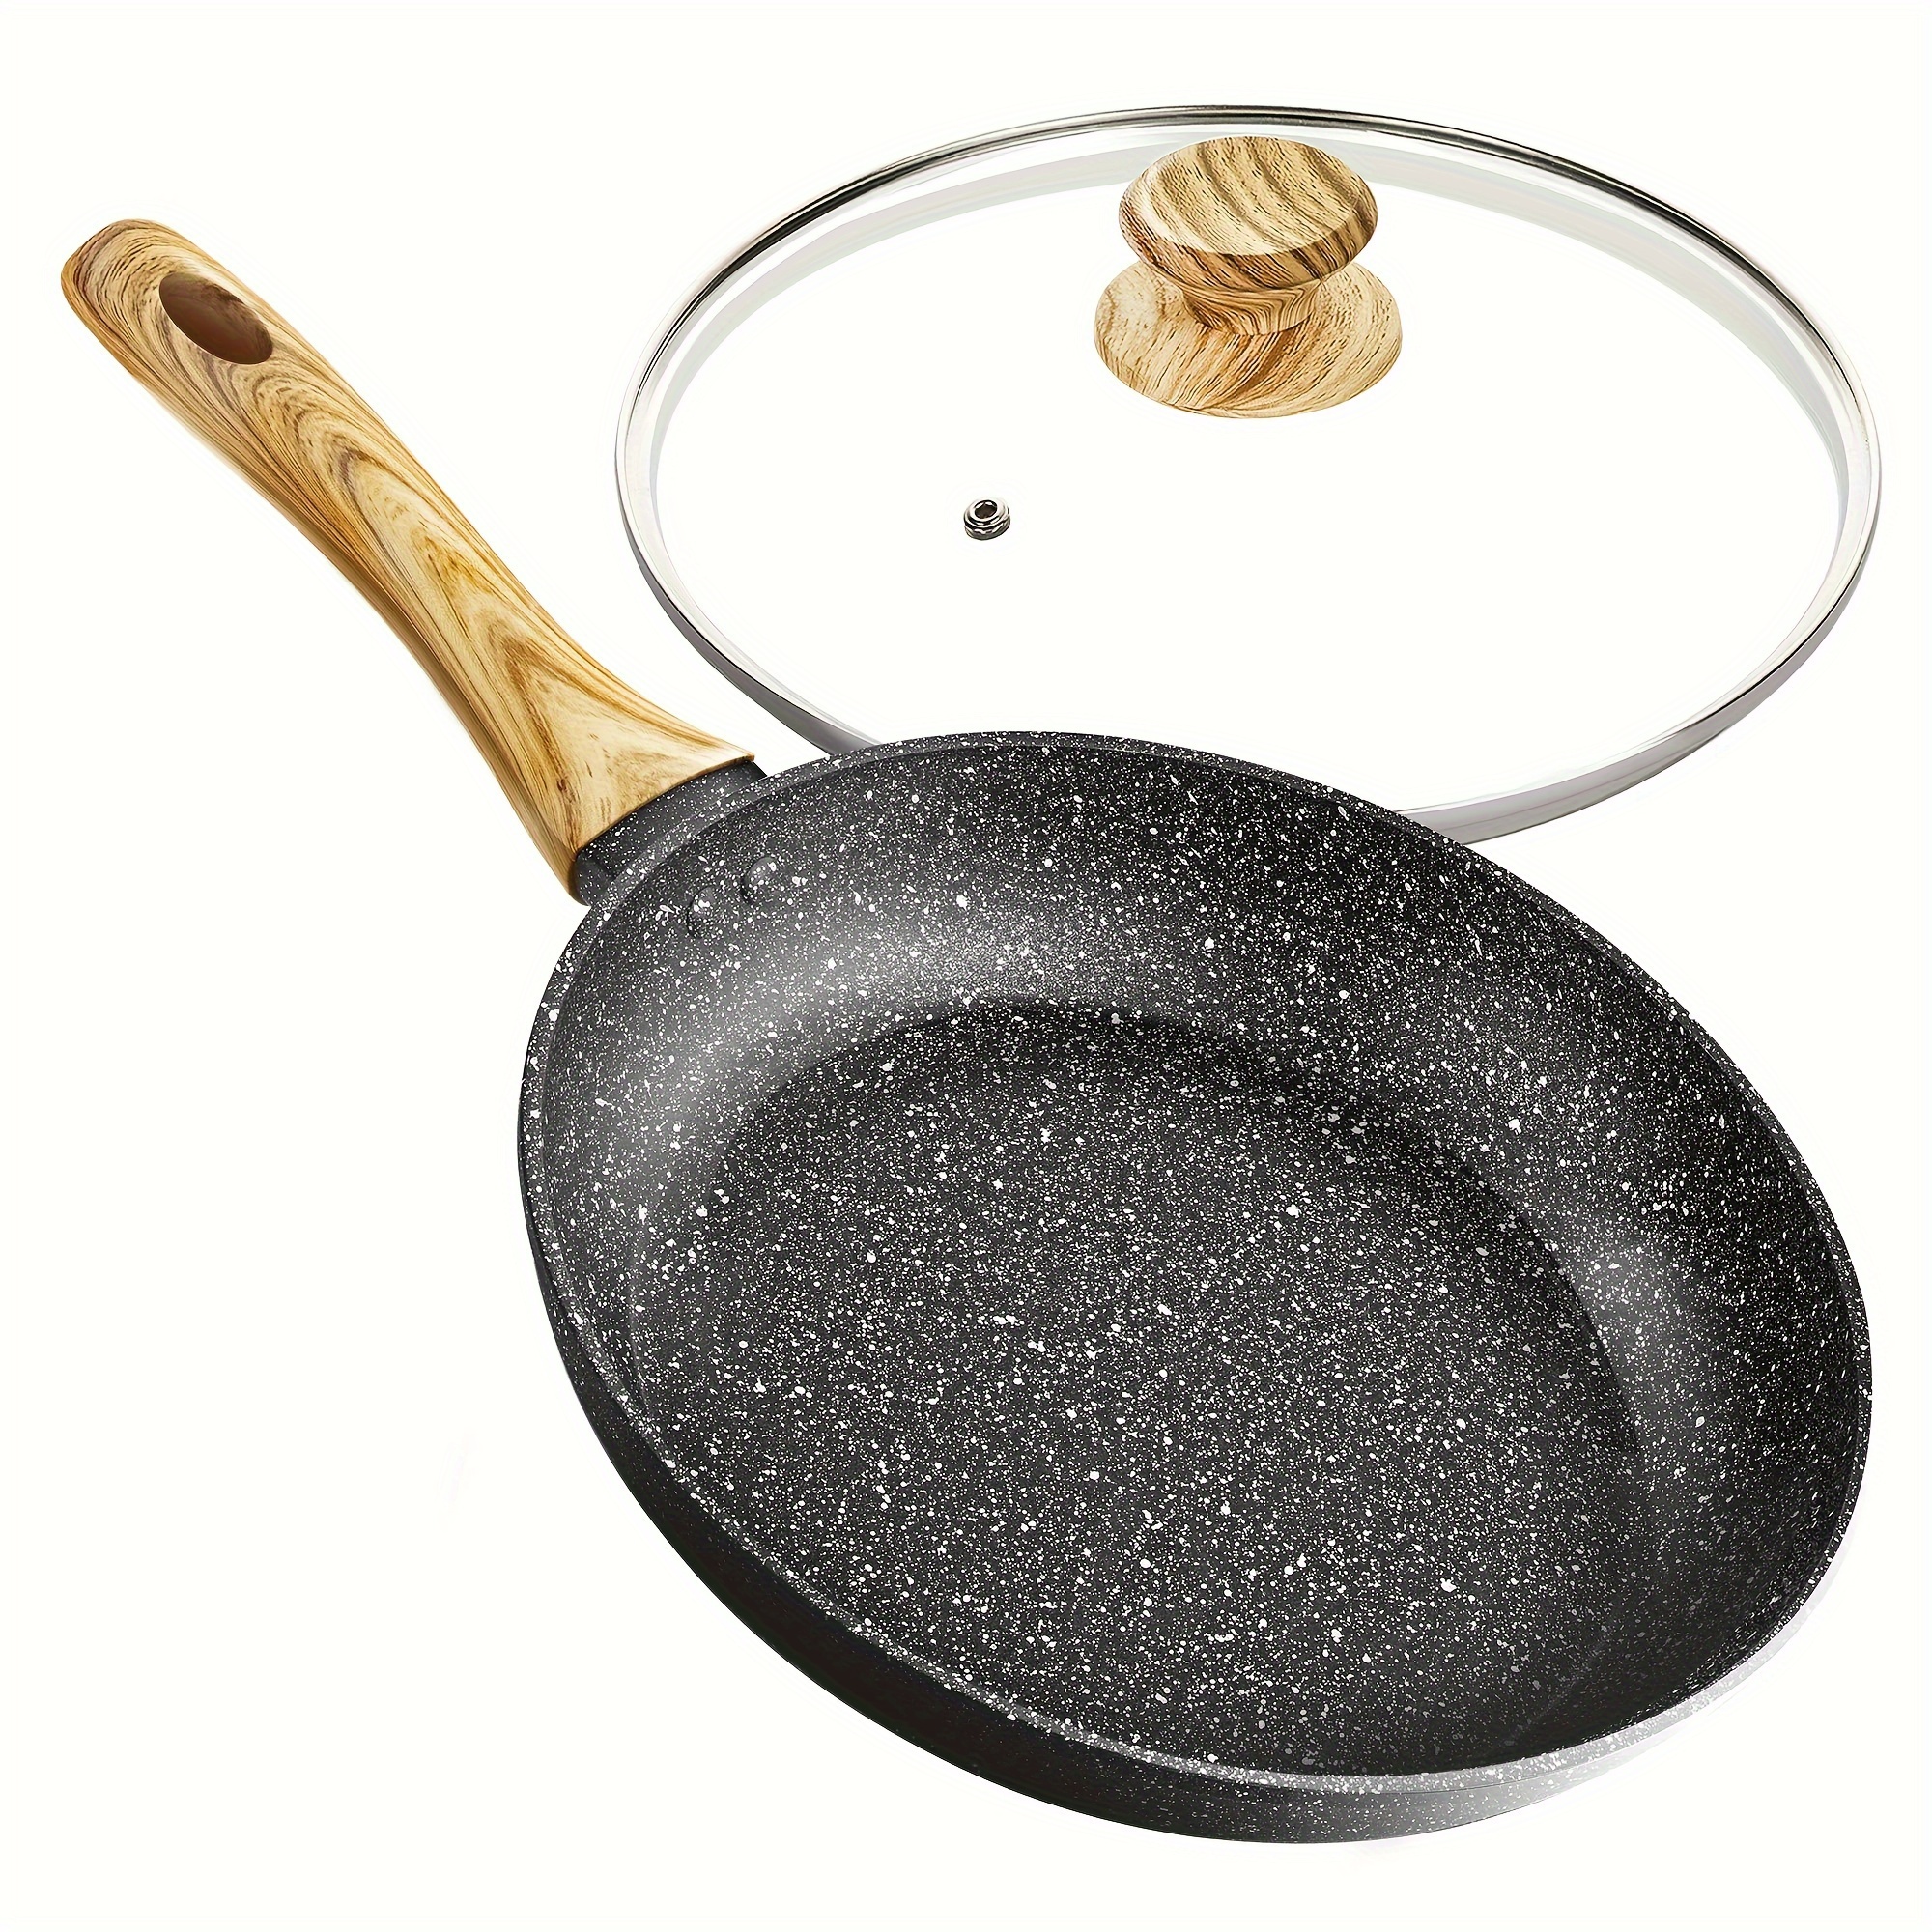 

Nonstick Frying Pan With Lid, 12 Inch Frying Pan With Stone Coating, Large Frying Pan Granite With Bakelite Handle, Induction Compatible